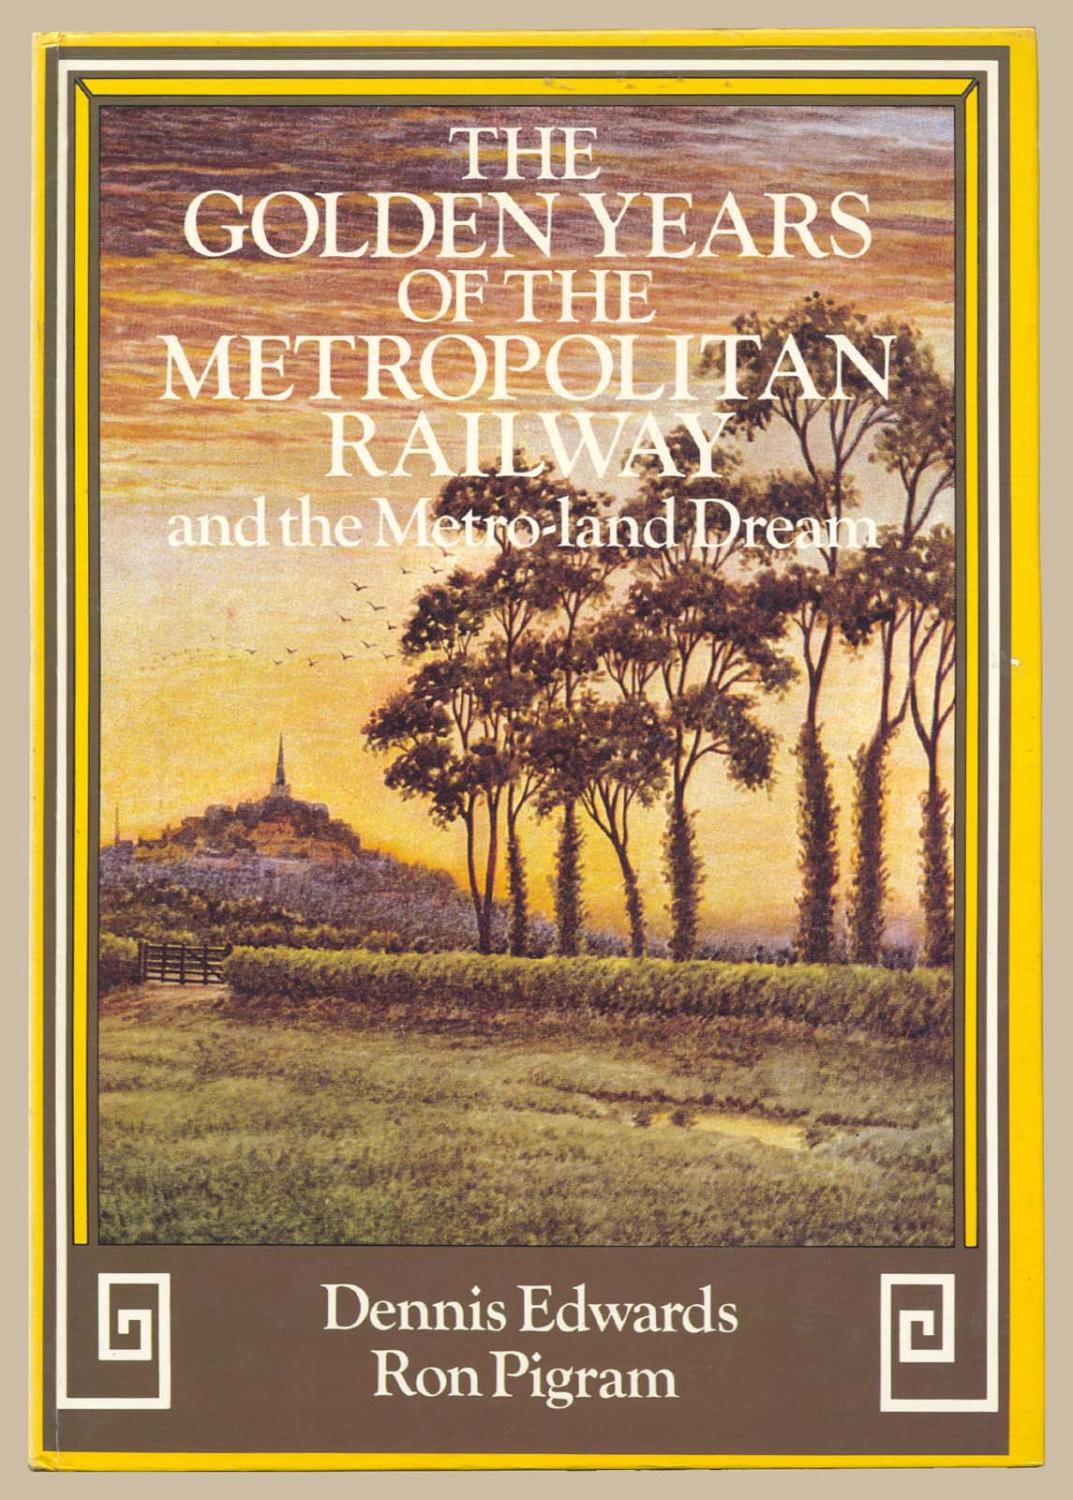 The Golden Years of the Metropolitan Railway and the Metro-land Dream